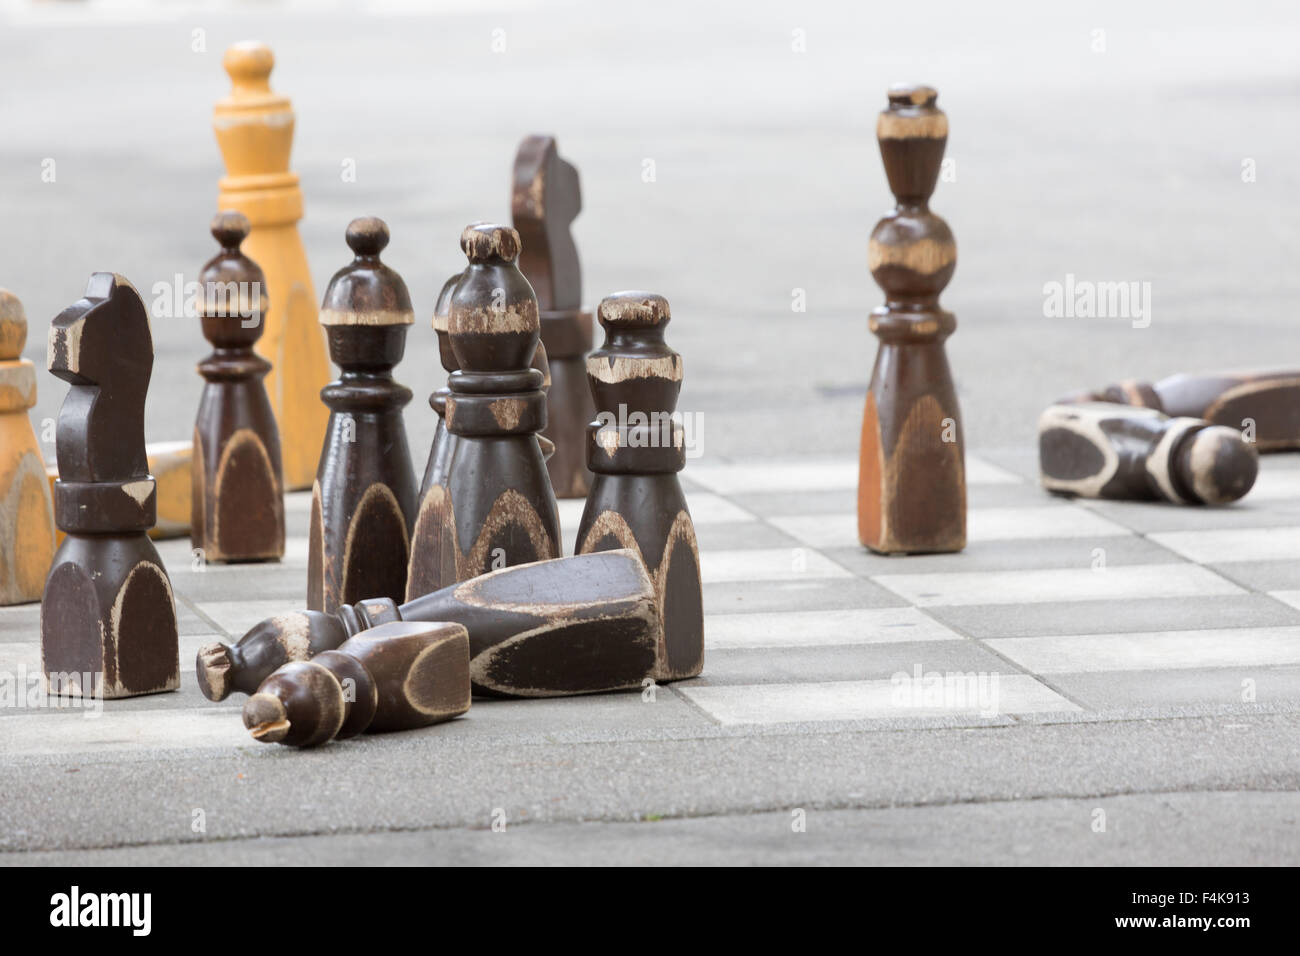 Life Size Chess Pieces On A Board Outside At A Hotel Pool Side Stock Photo  - Download Image Now - iStock